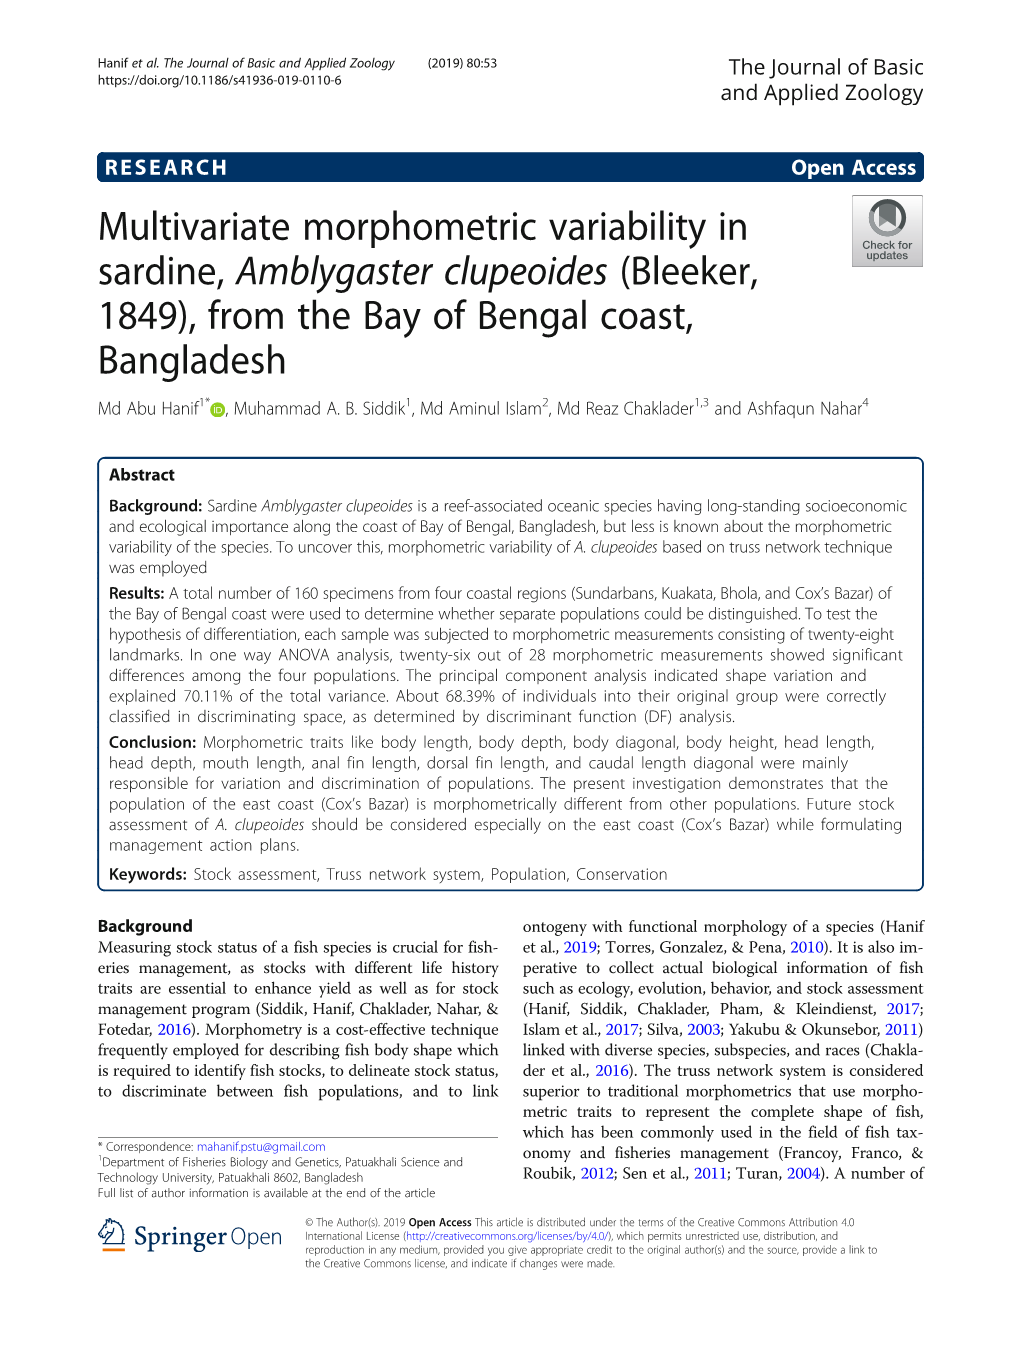 Multivariate Morphometric Variability in Sardine, Amblygaster Clupeoides (Bleeker, 1849), from the Bay of Bengal Coast, Bangladesh Md Abu Hanif1* , Muhammad A